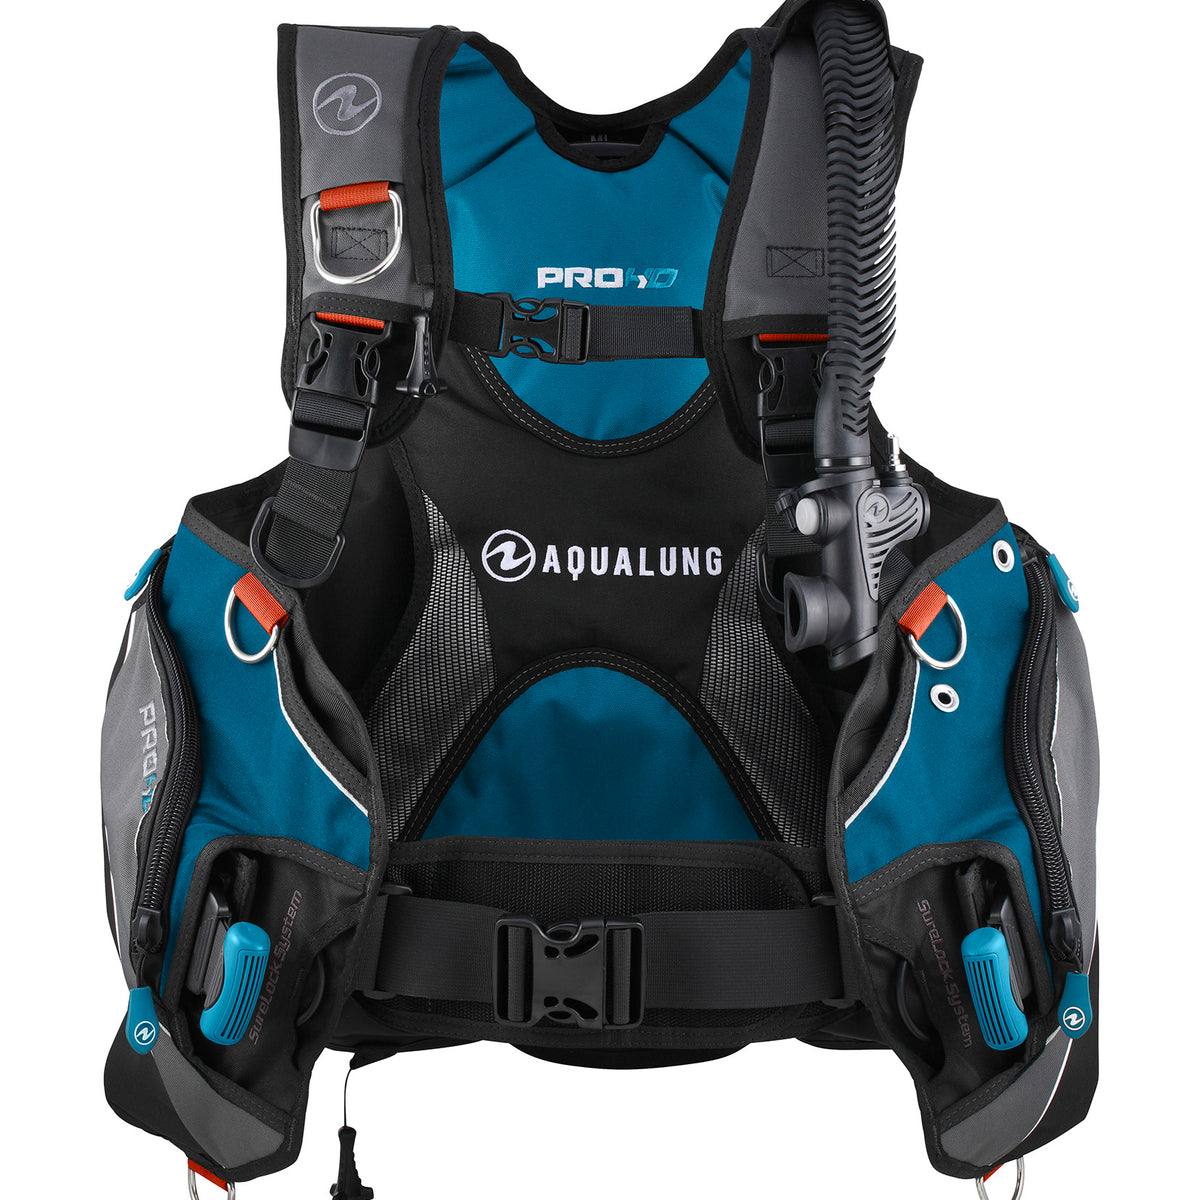 Oceanic Professional Diver Package Reg/BCD For Sale Online in Canada